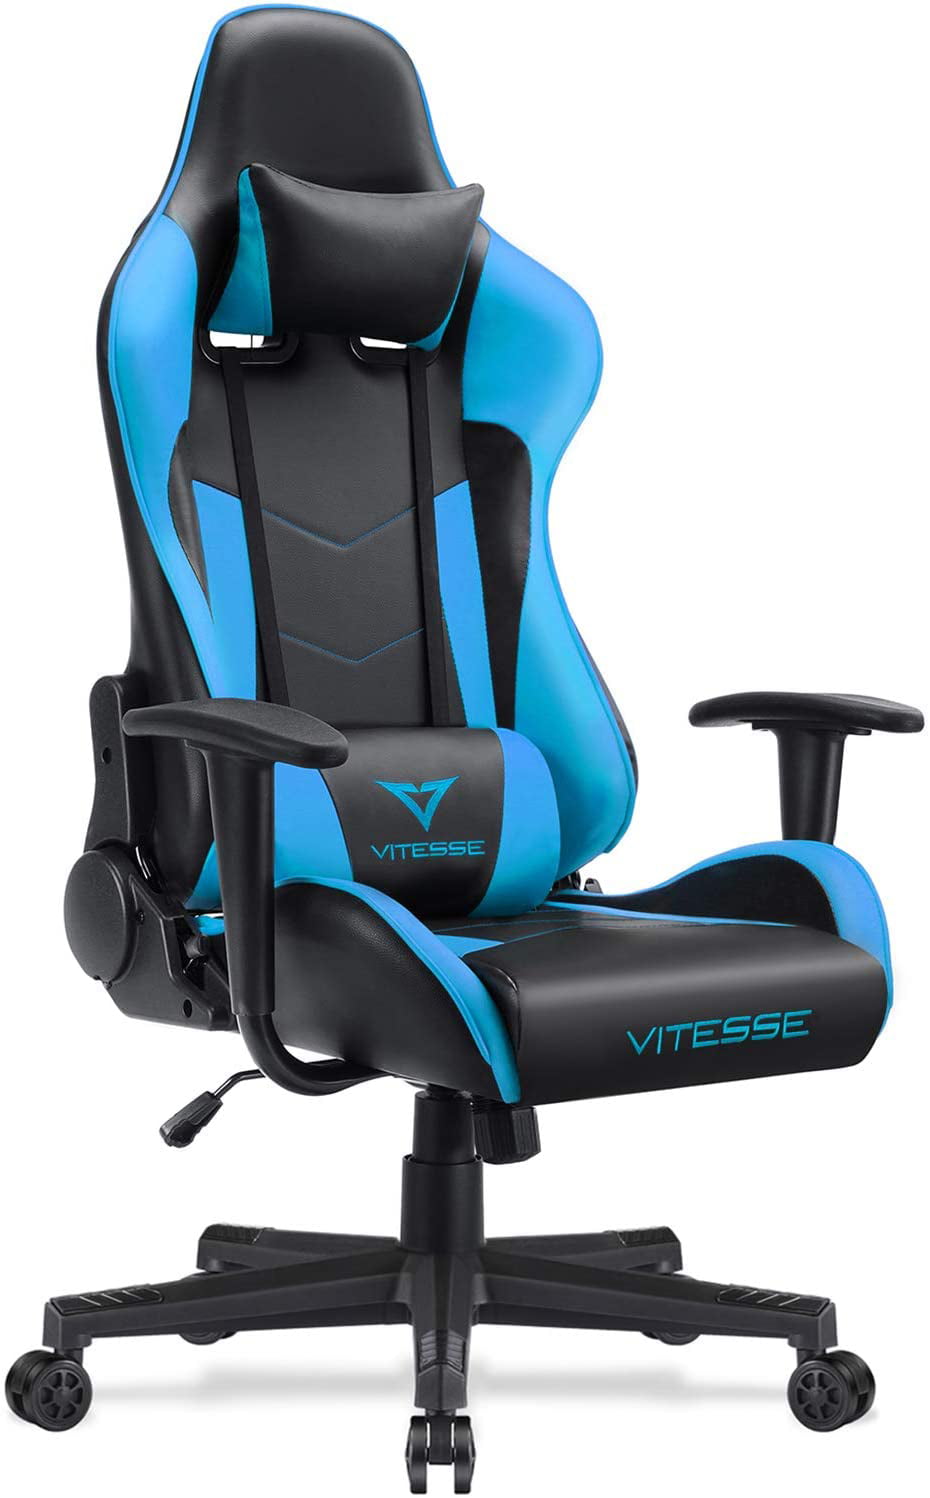 Which is the Best Chair for Gaming?